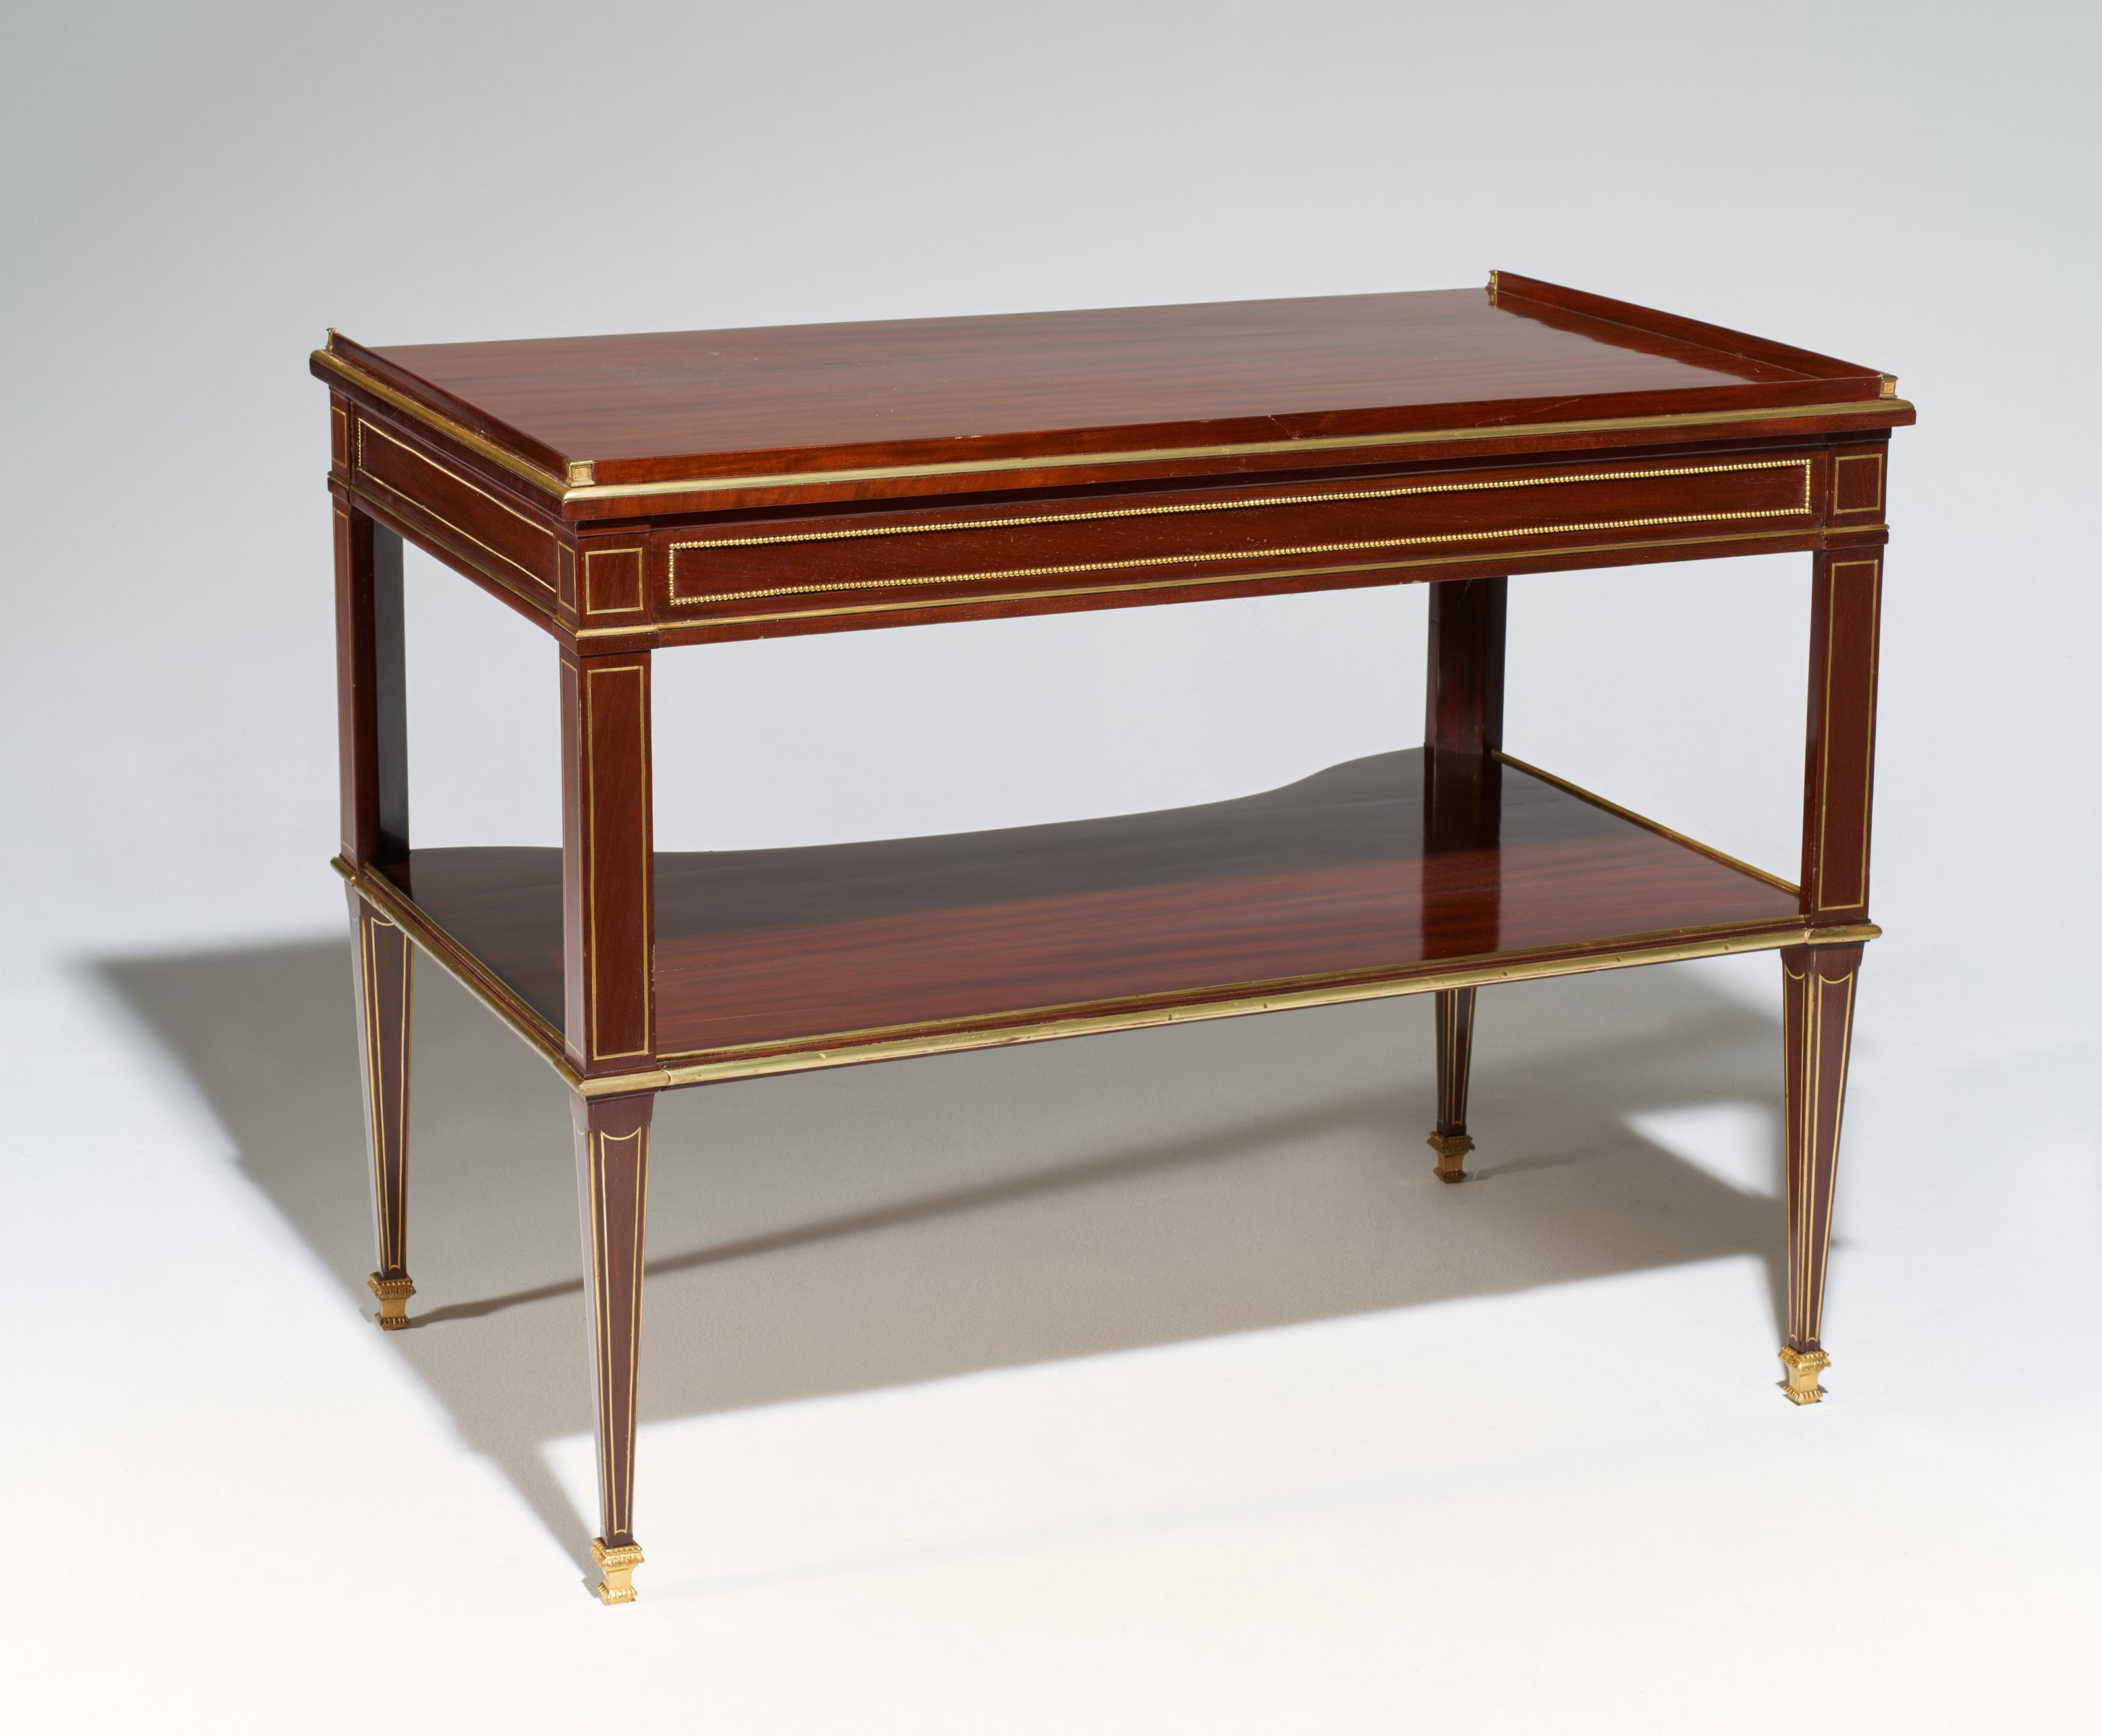 CLASSICISTICAL WRITING DESK MADE OF MAHOGANY ON SOFTWOOD AND LIME WOOD WITH CHERRY WOOD VENEER. - Image 3 of 4